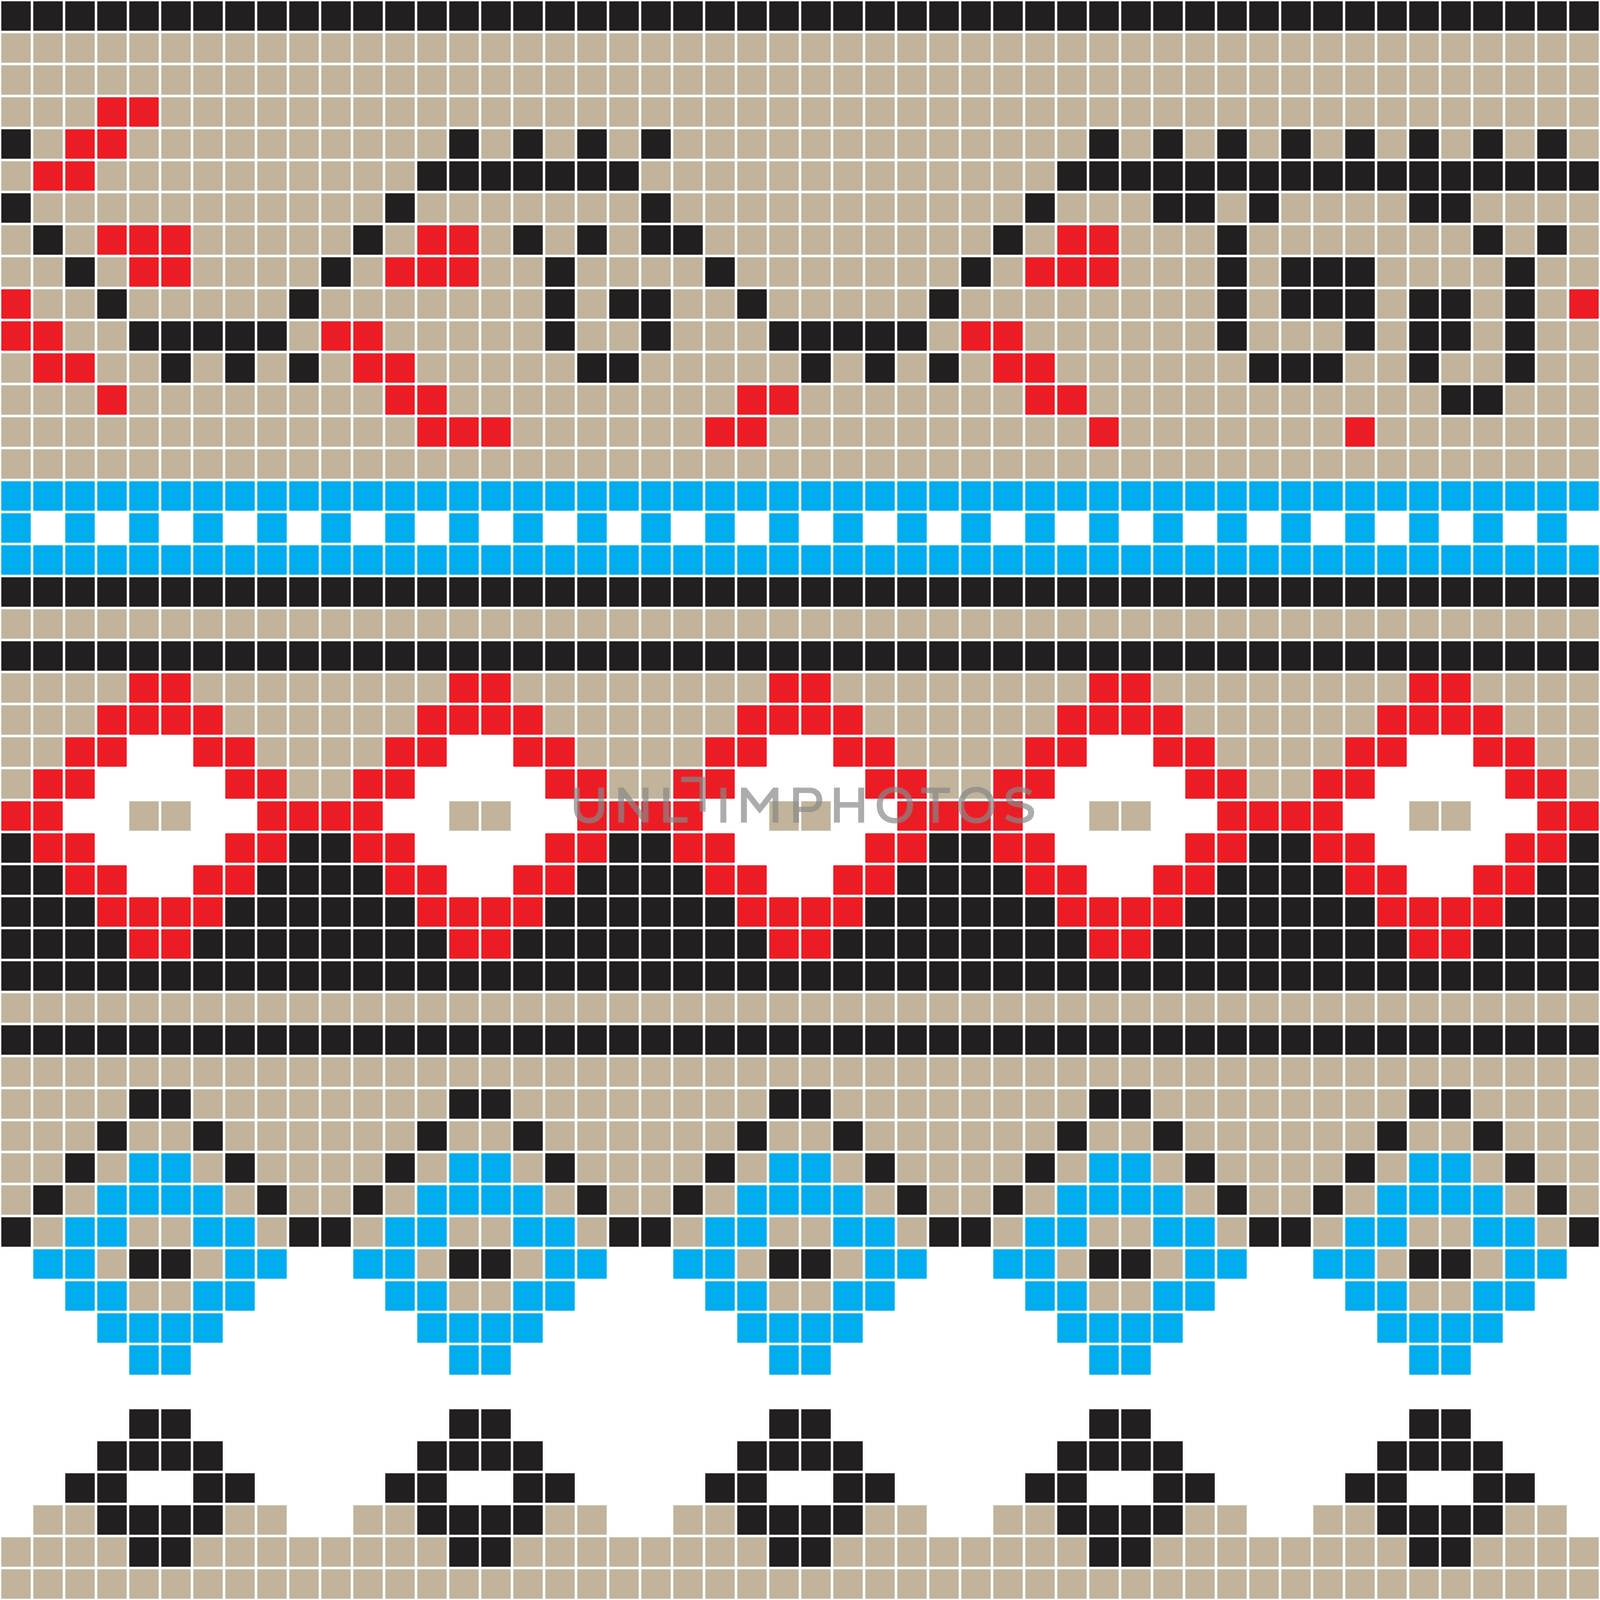 Freestyle pixel pattern inspired by Romanian traditional motifs